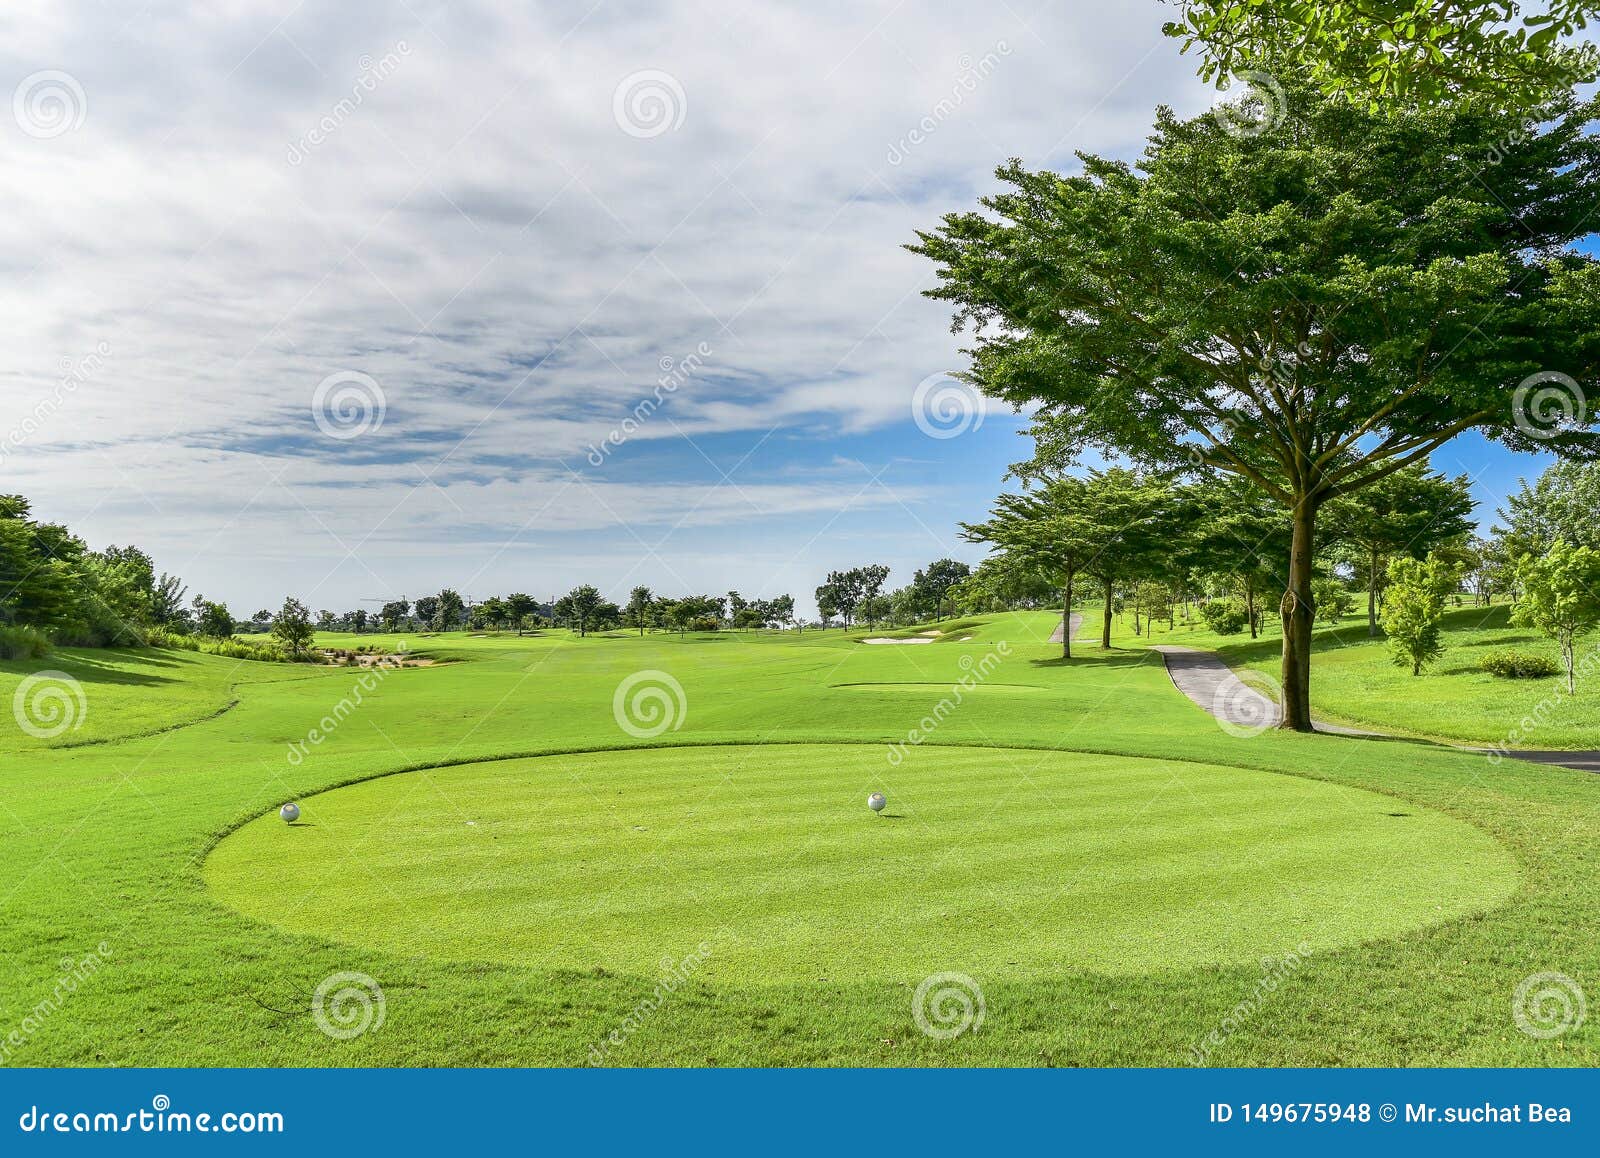 A Beautiful Golf Course , Sand Bunker and Green Grass Stock Photo